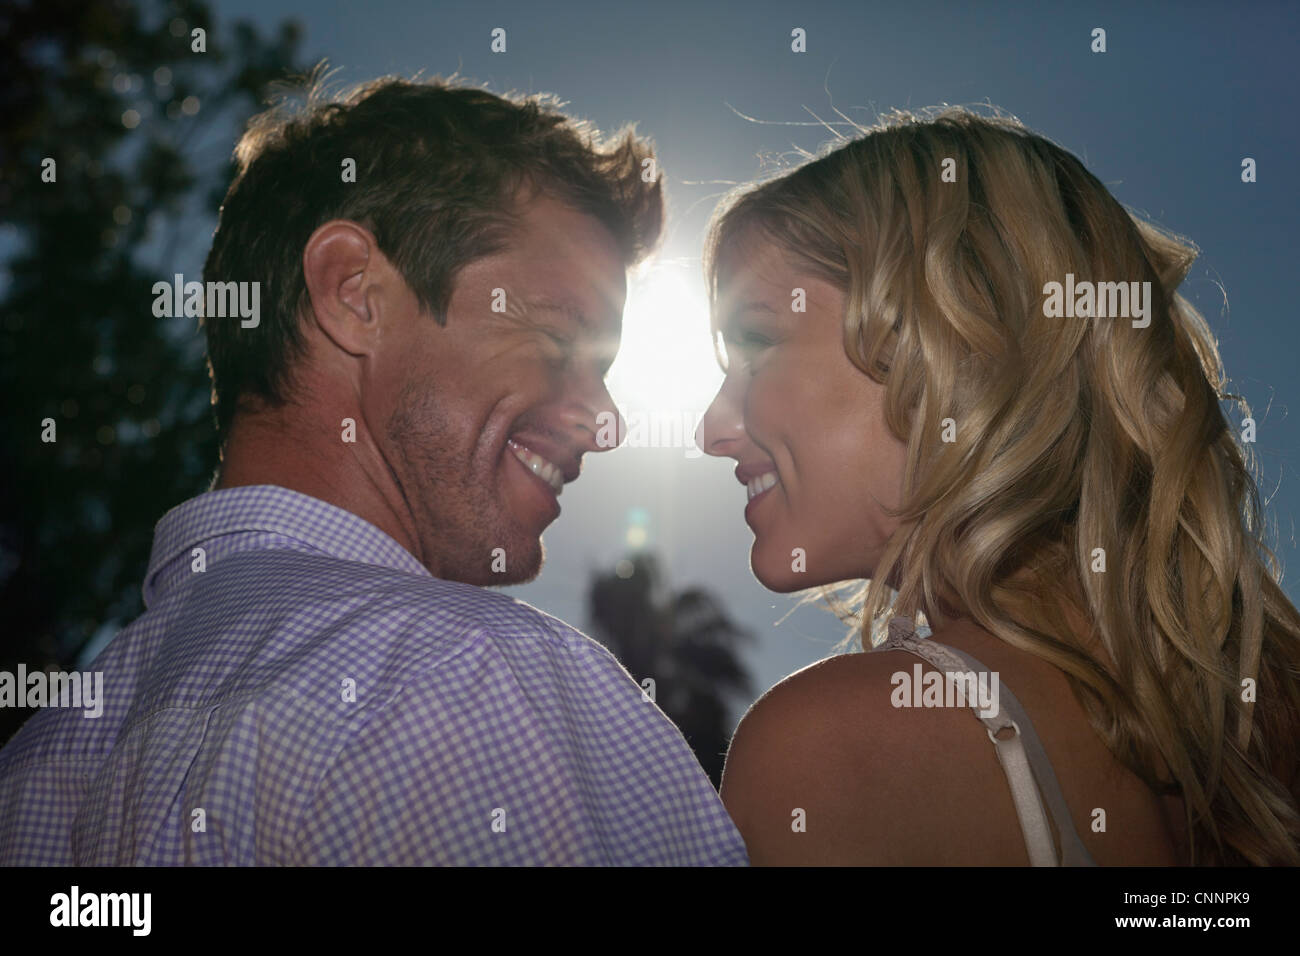 Couple smiling at each other outdoors Stock Photo